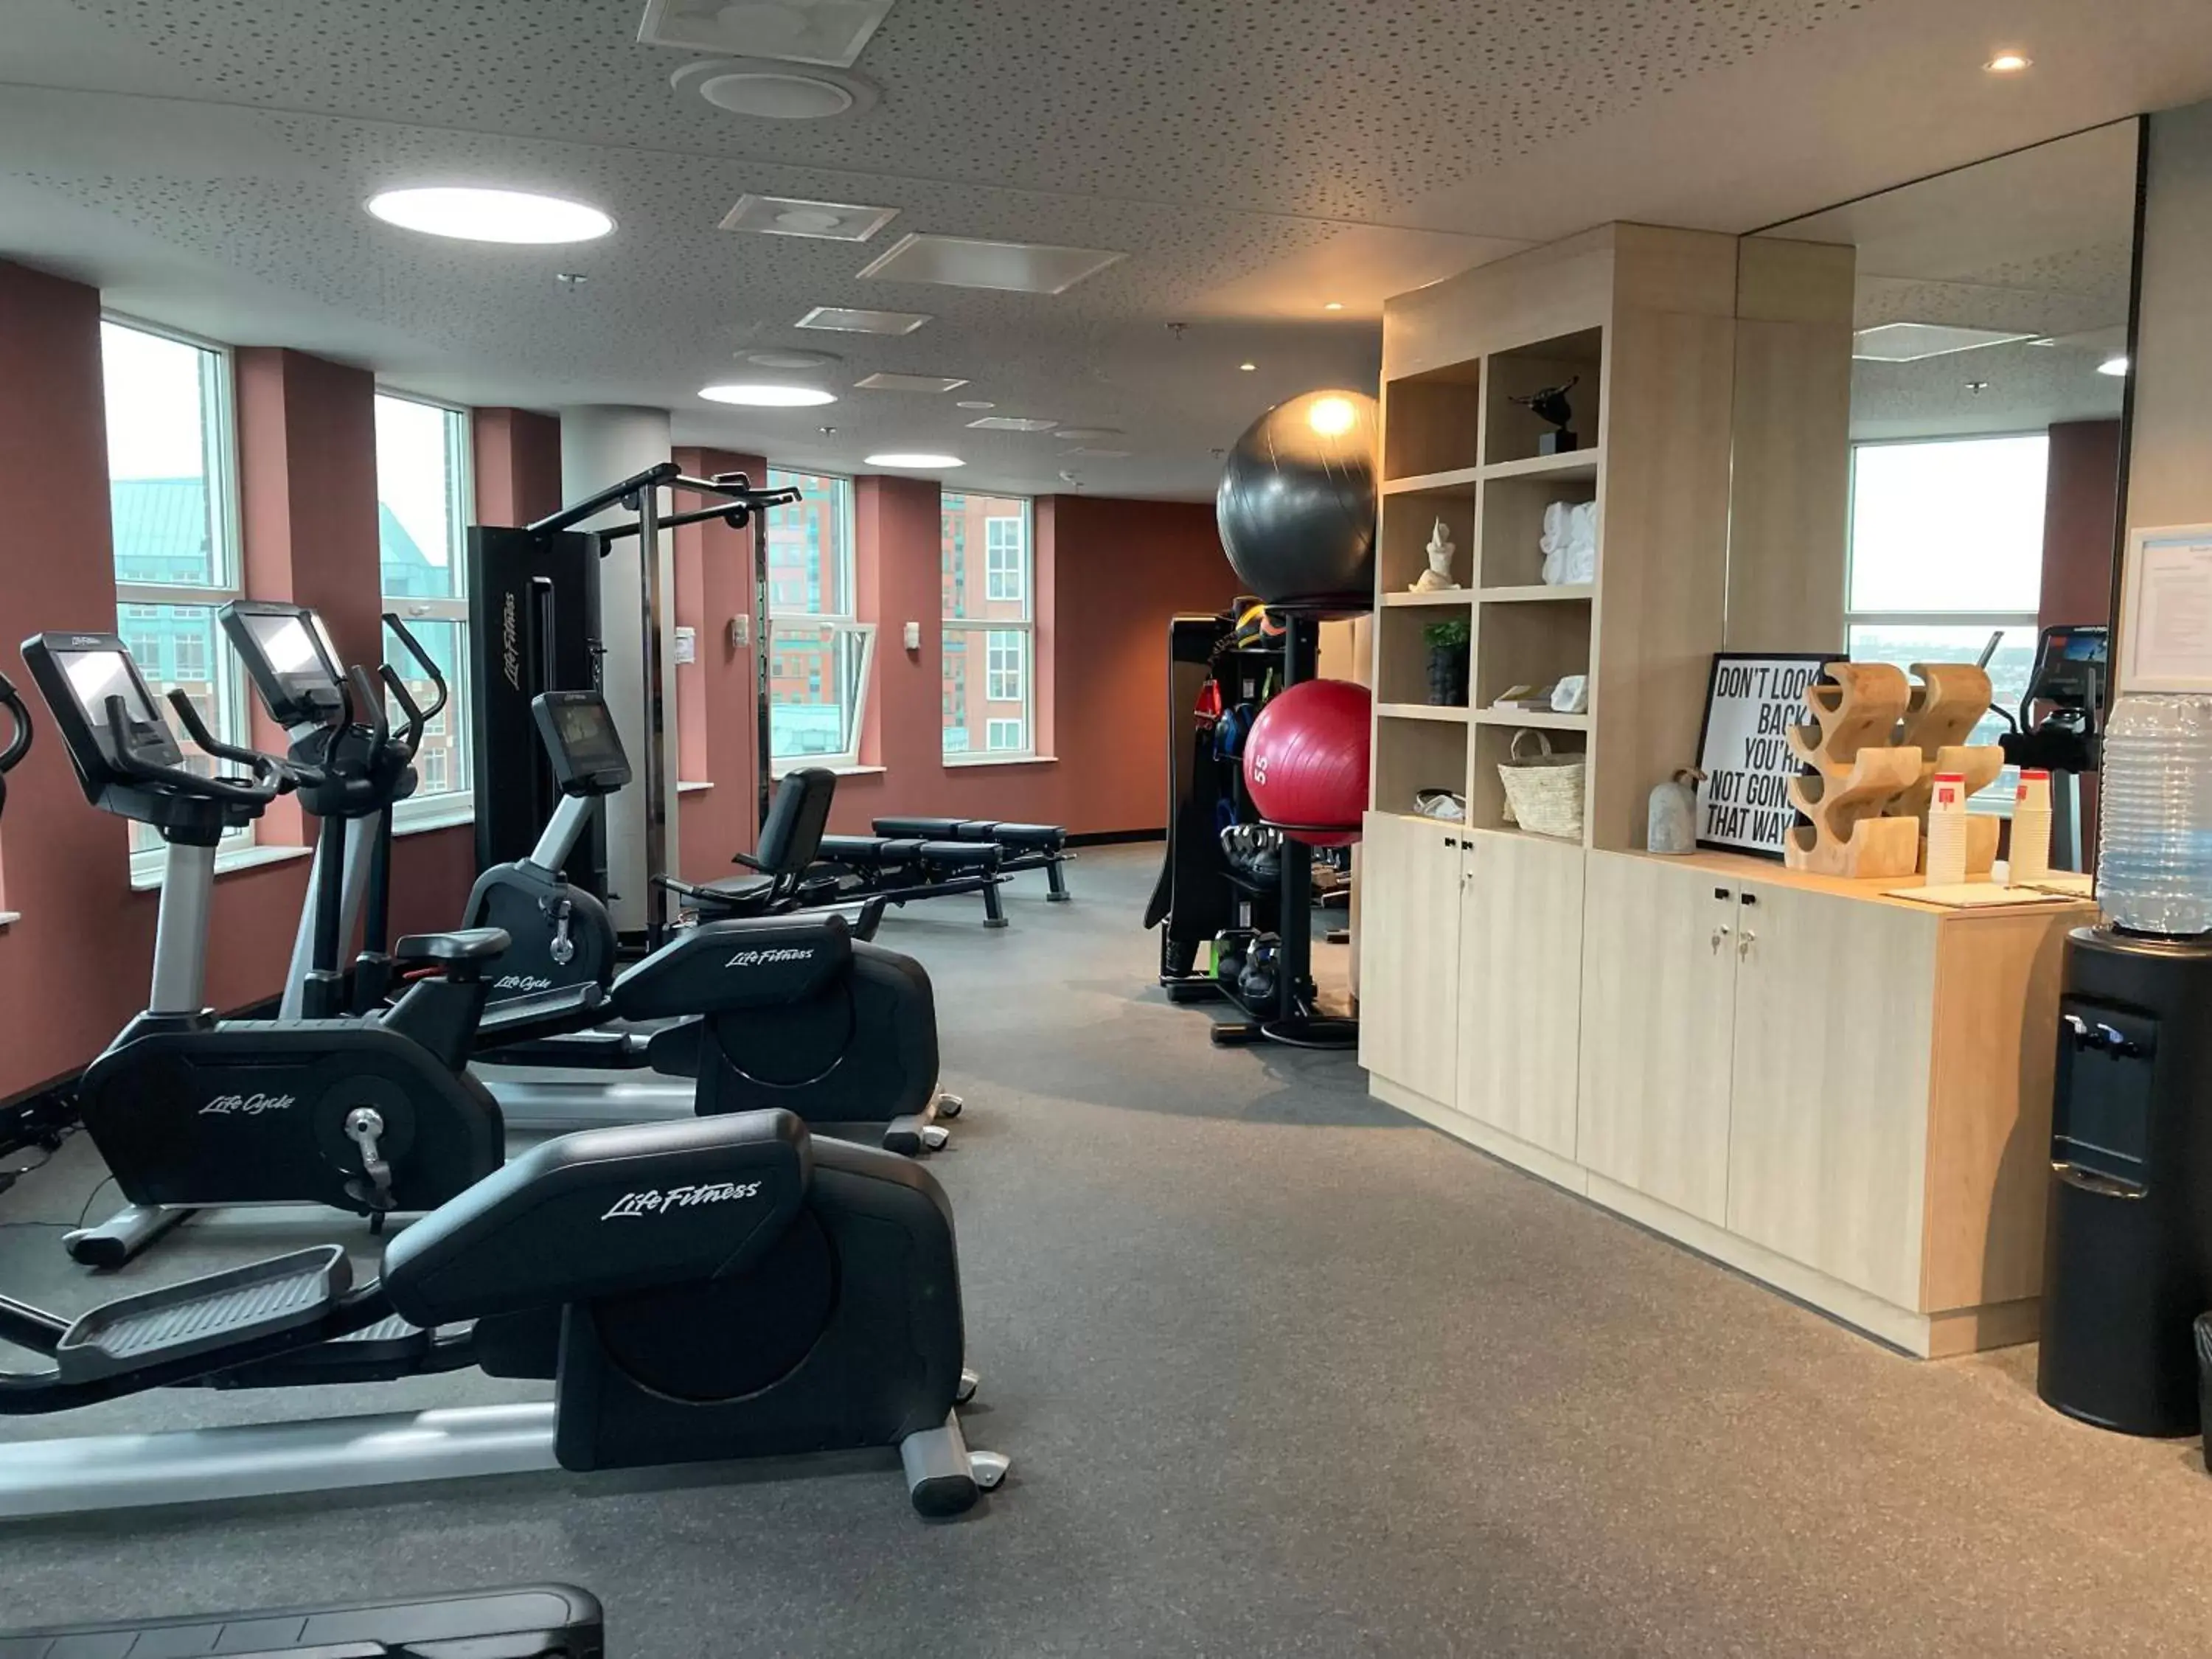 Fitness centre/facilities, Fitness Center/Facilities in Moxy The Hague